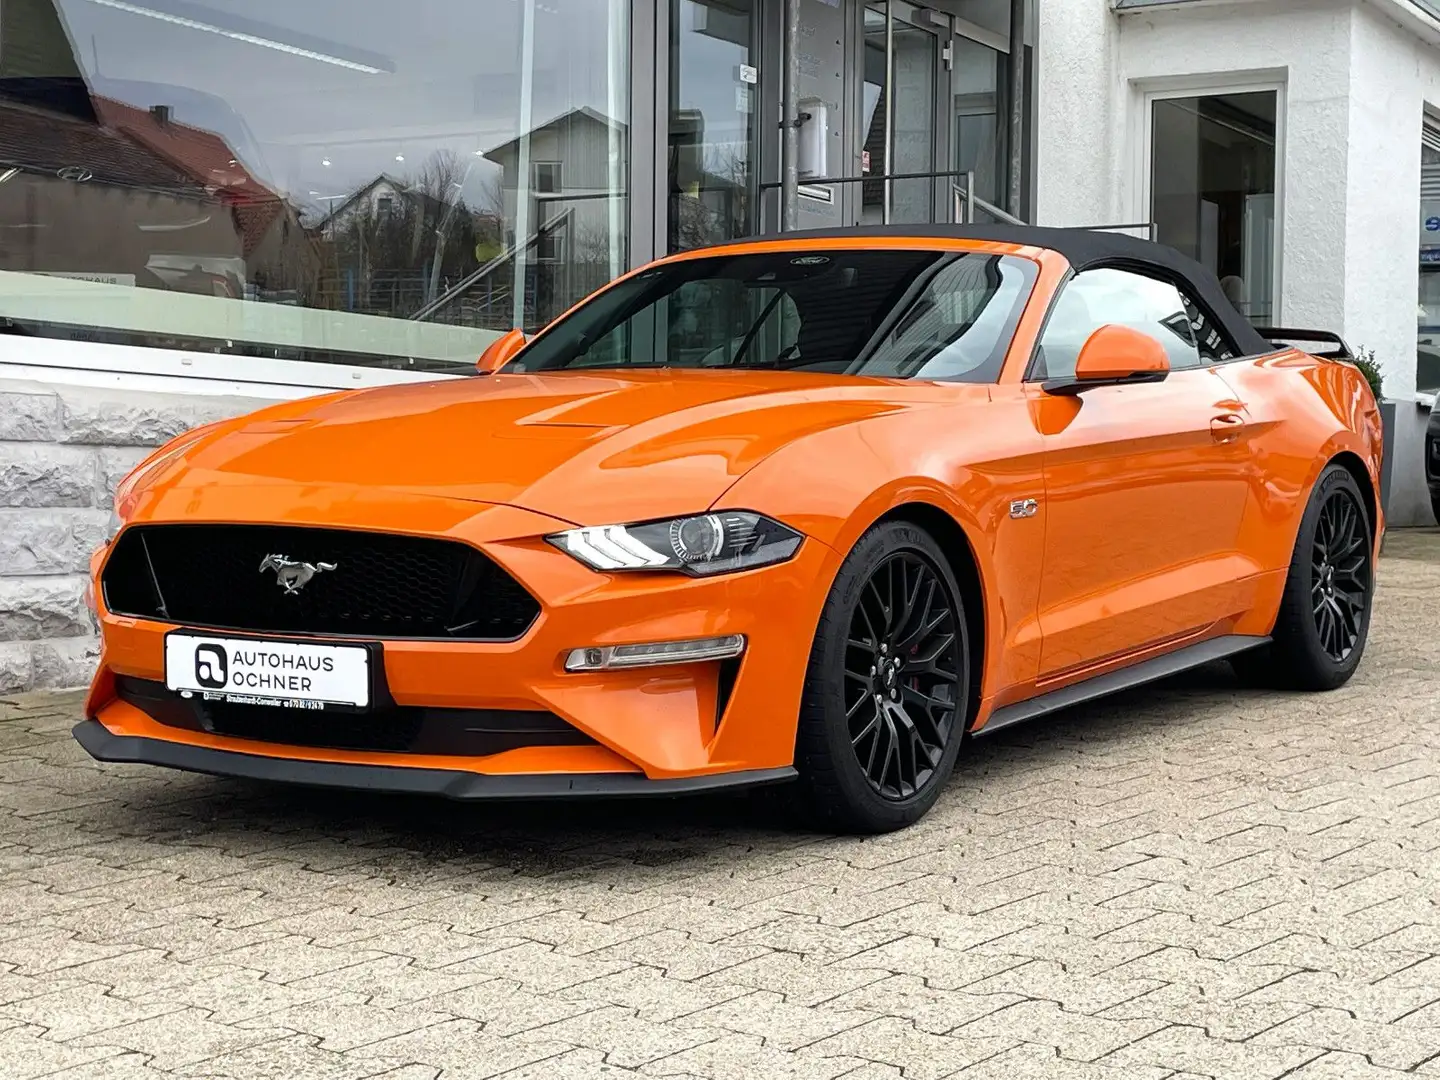 Ford Mustang 5.0 Ti-VCT V8 Convertible GT Orange - 2